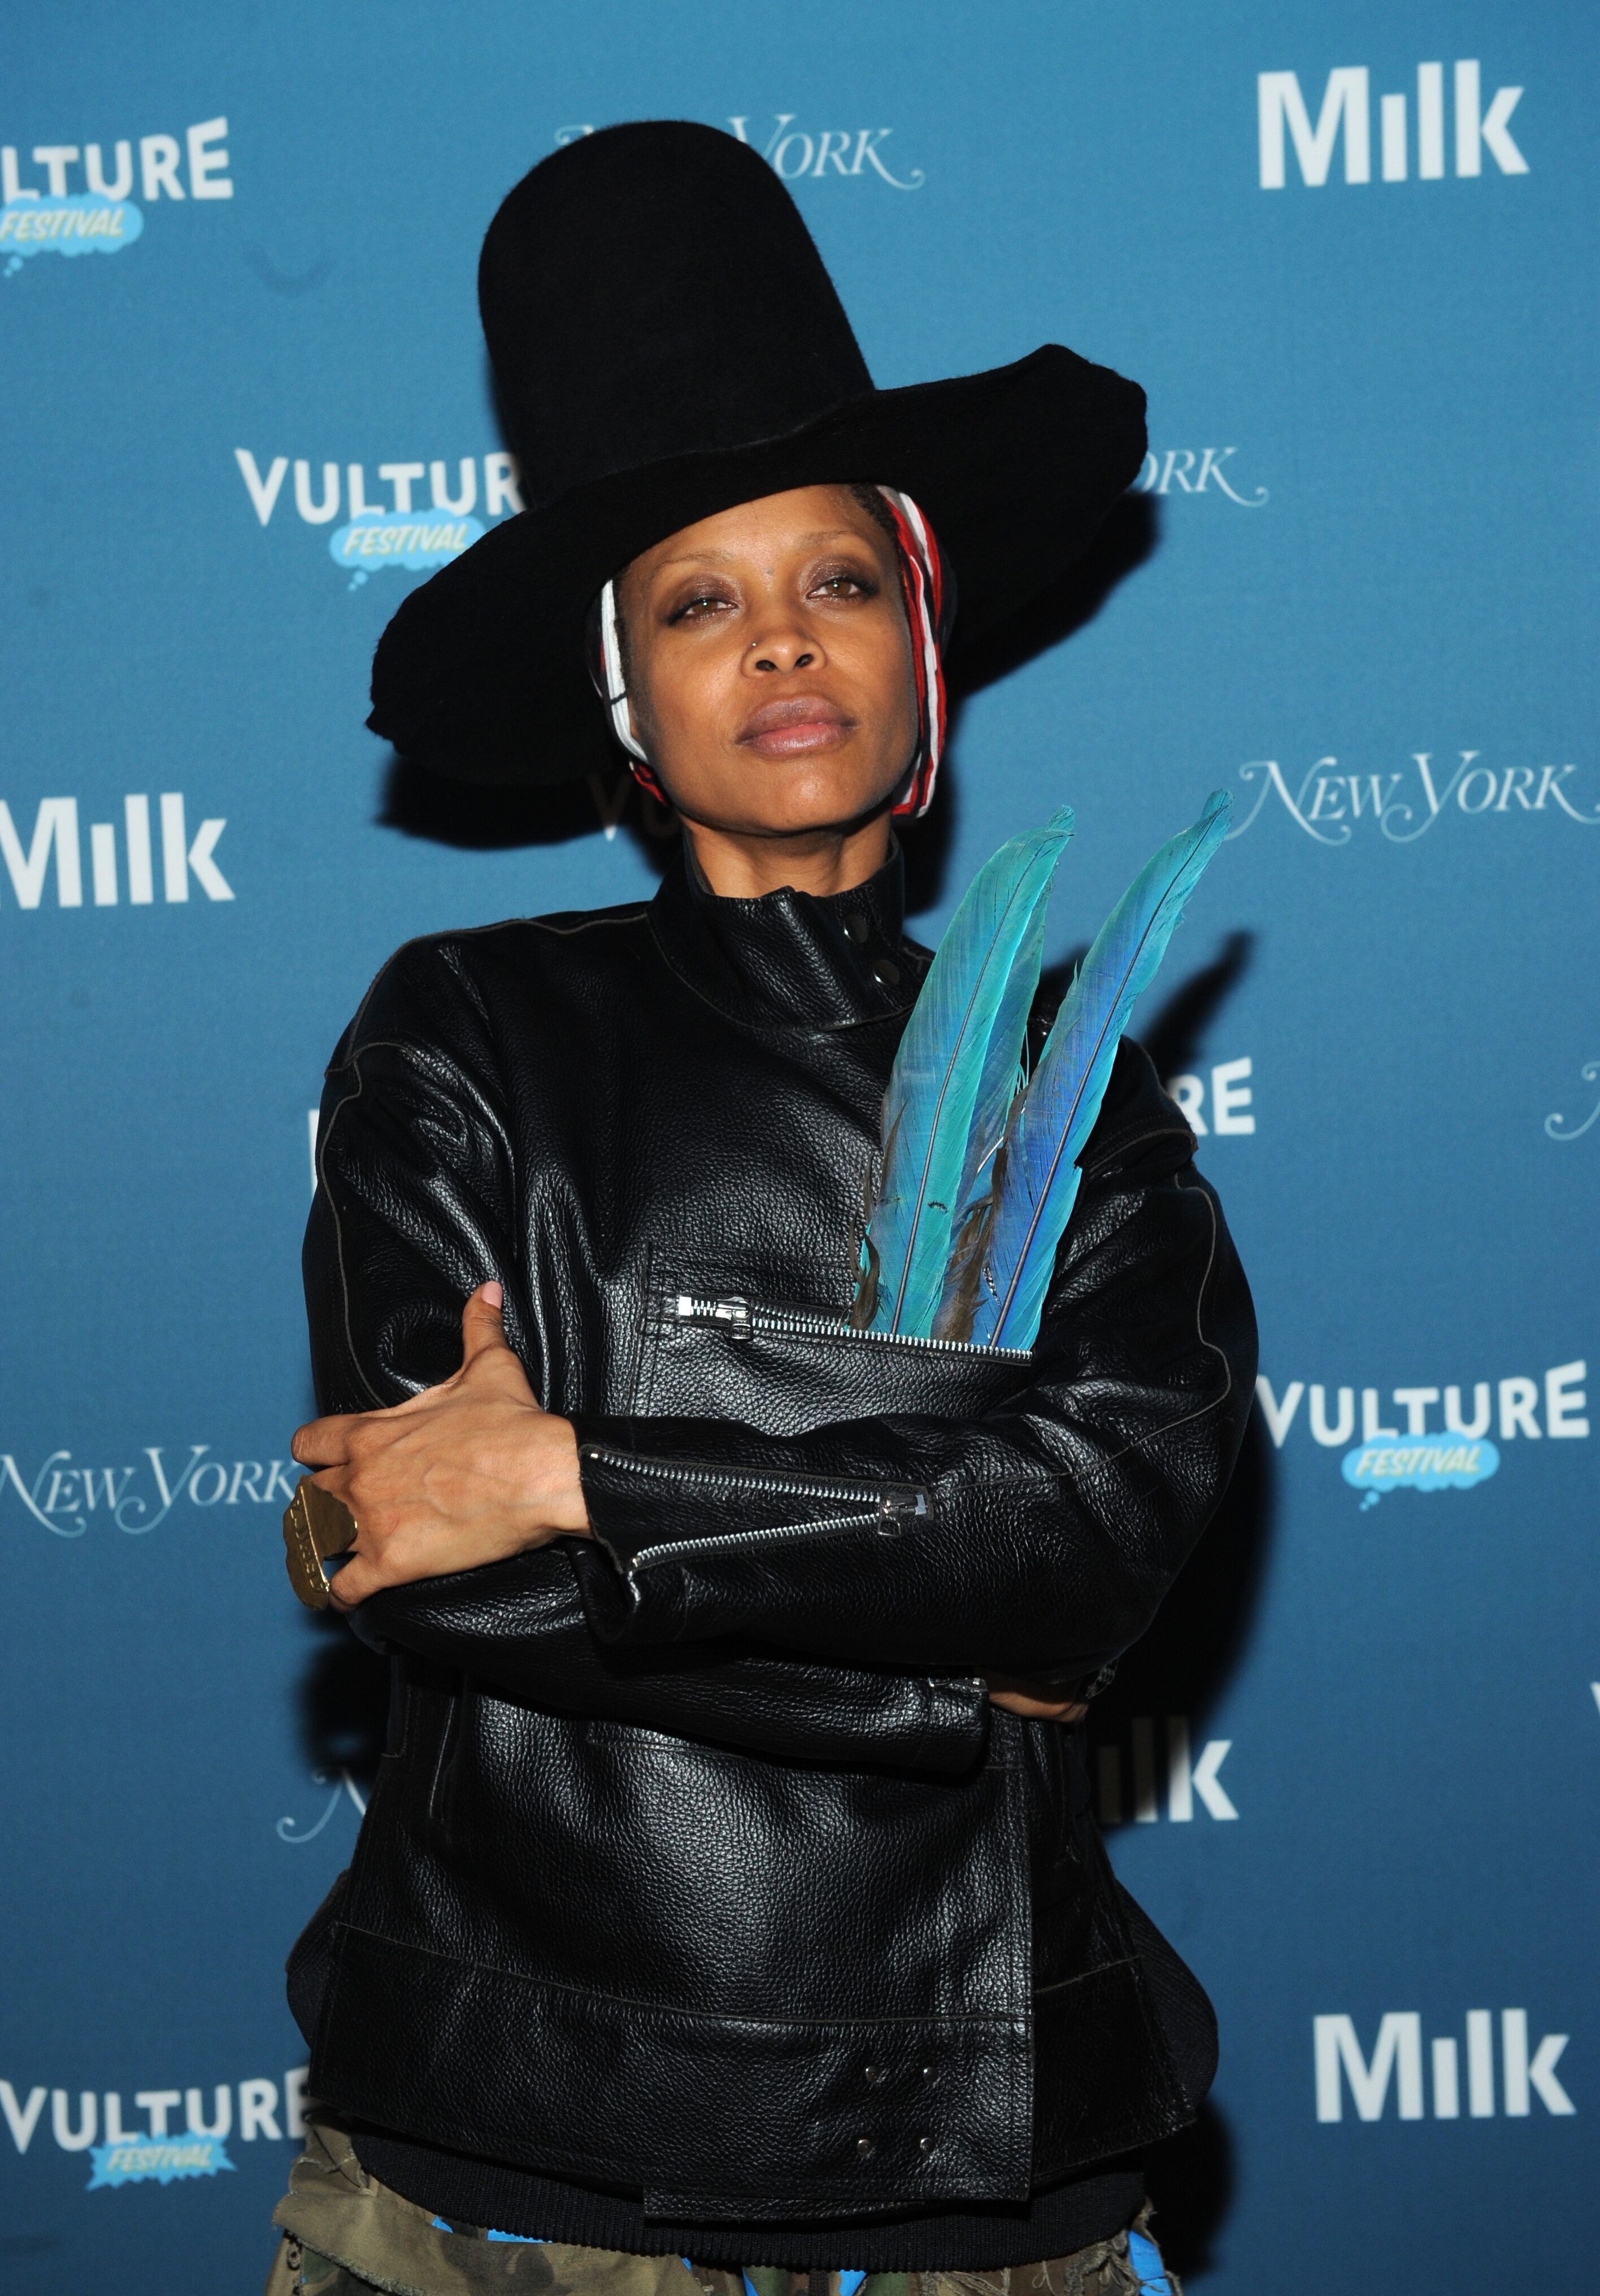 Singer-songwriter Erykah Badu at the Vulture Festival Opening Night Party at Neuehouse | Photo: Getty Images/GlobalImagesUkraine